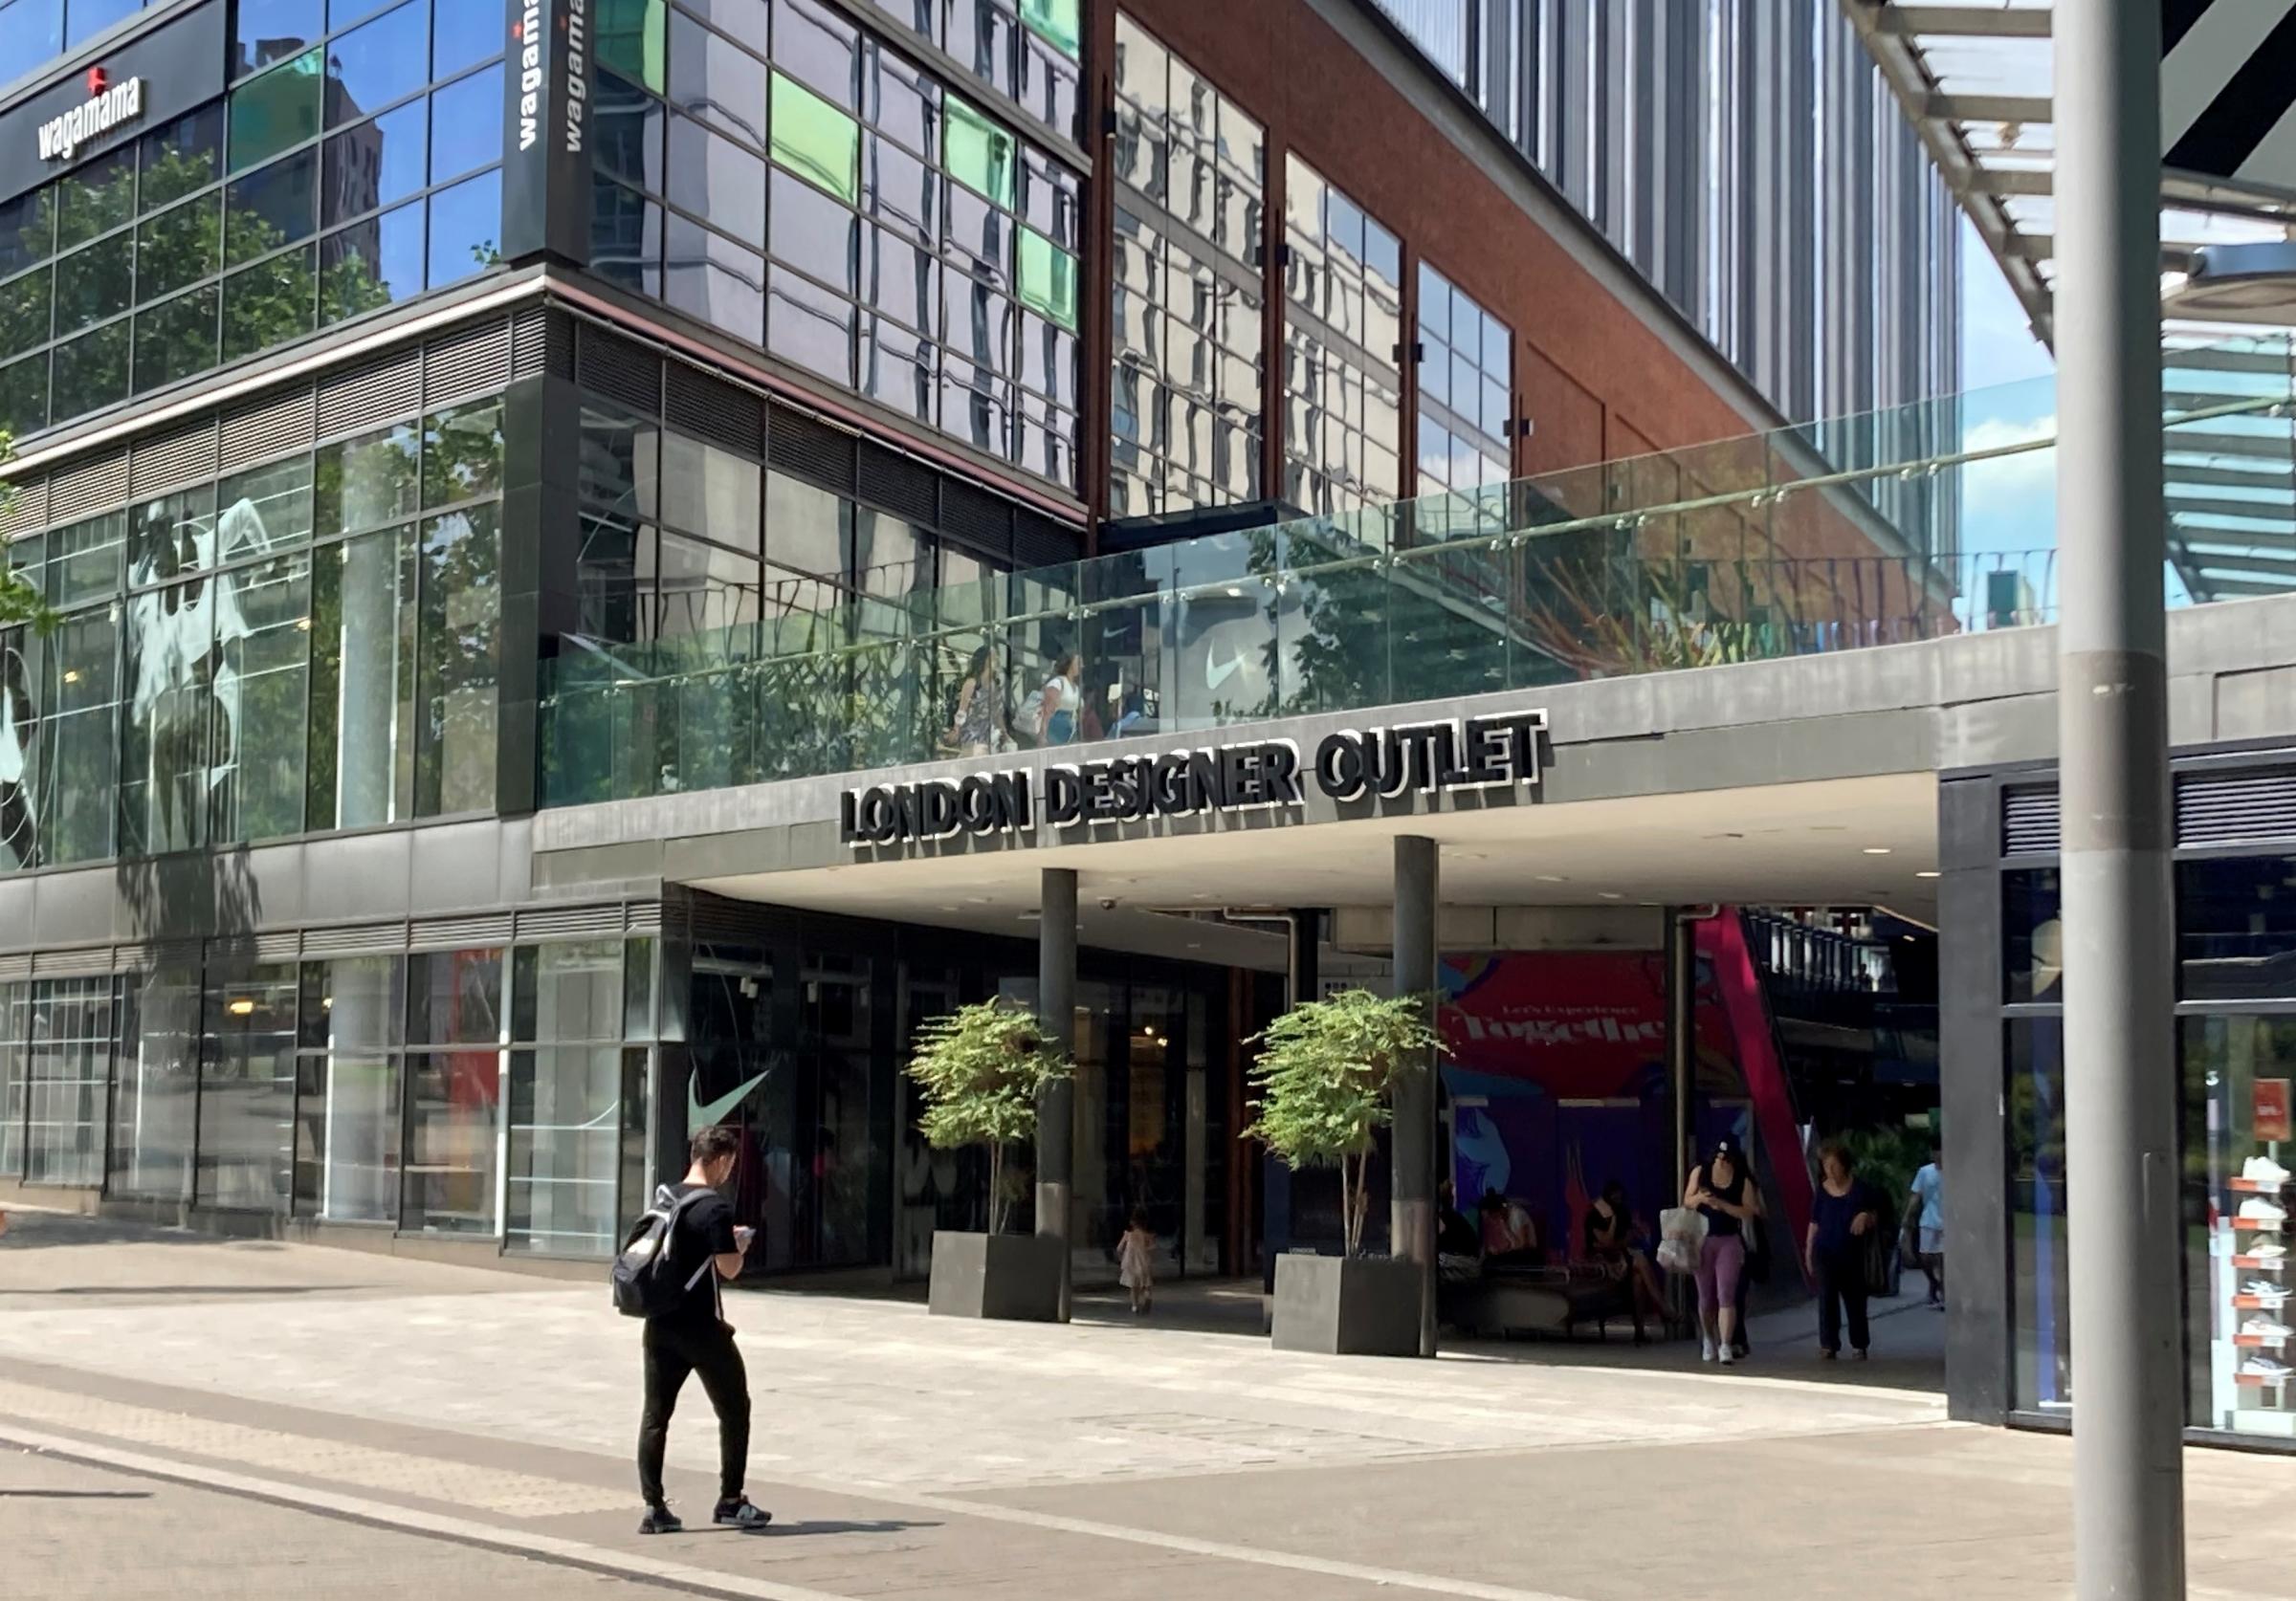 London Design Outlet. The London Design Outlet shopping centre is just a stones throw away. Image Credit: Grant Williams